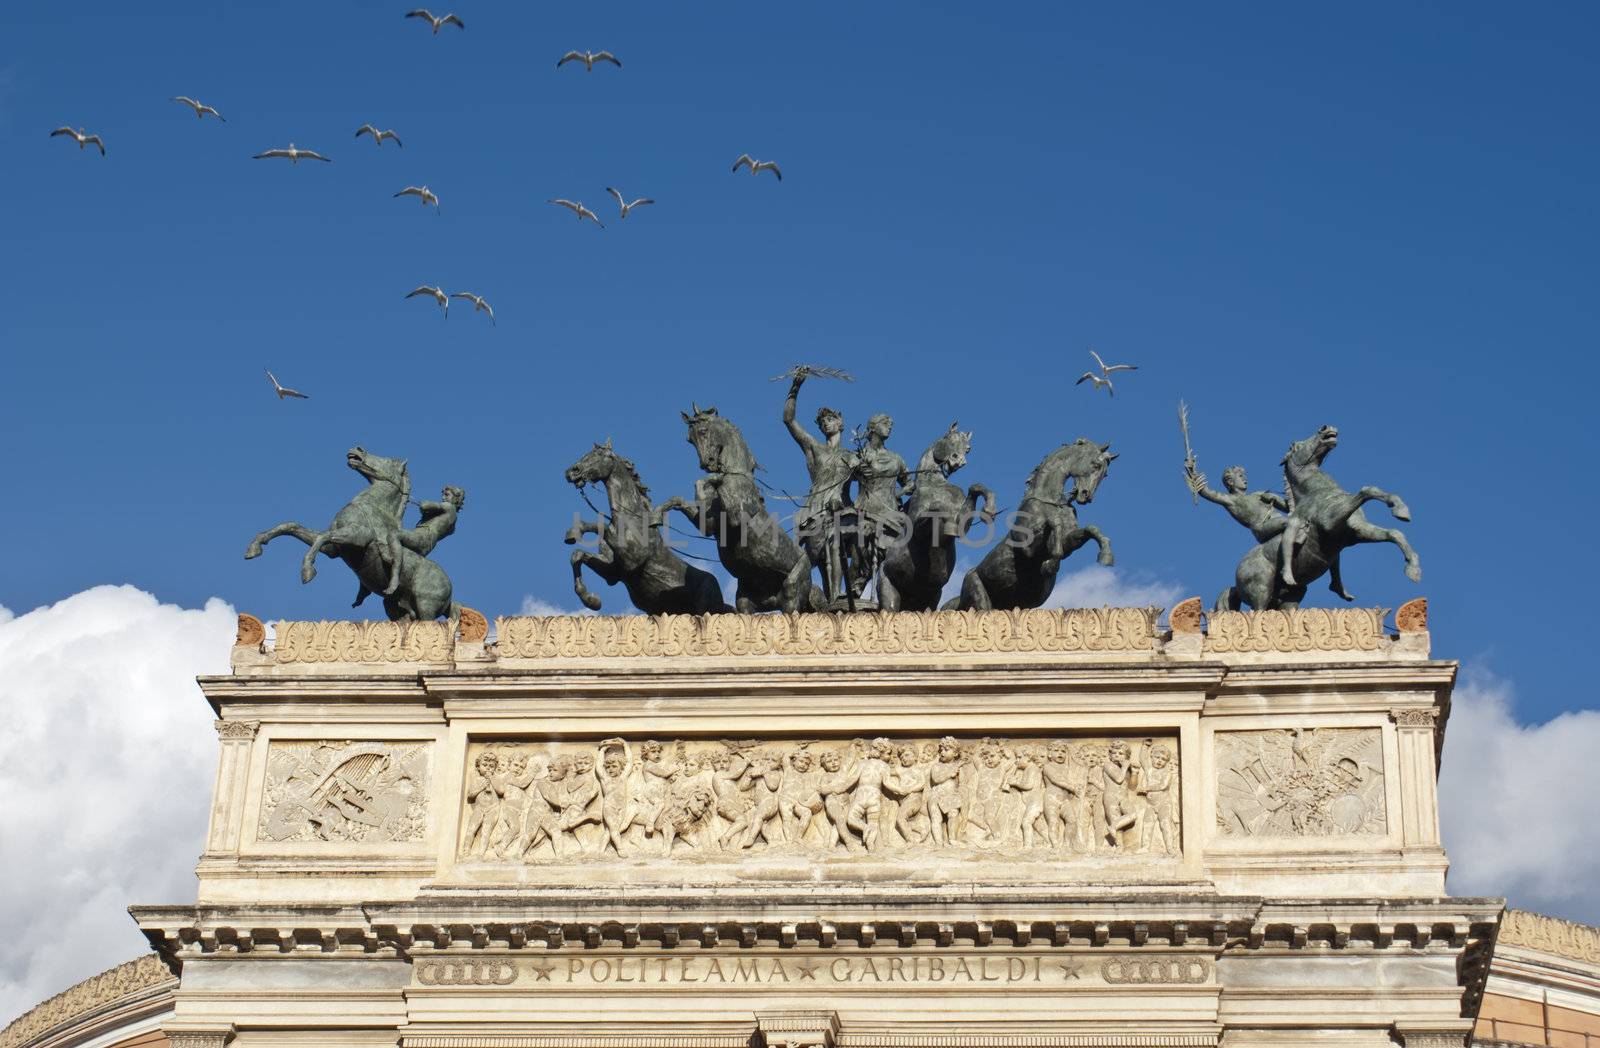 Details of the Politeama Garibaldi theater in Palermo with seagulls